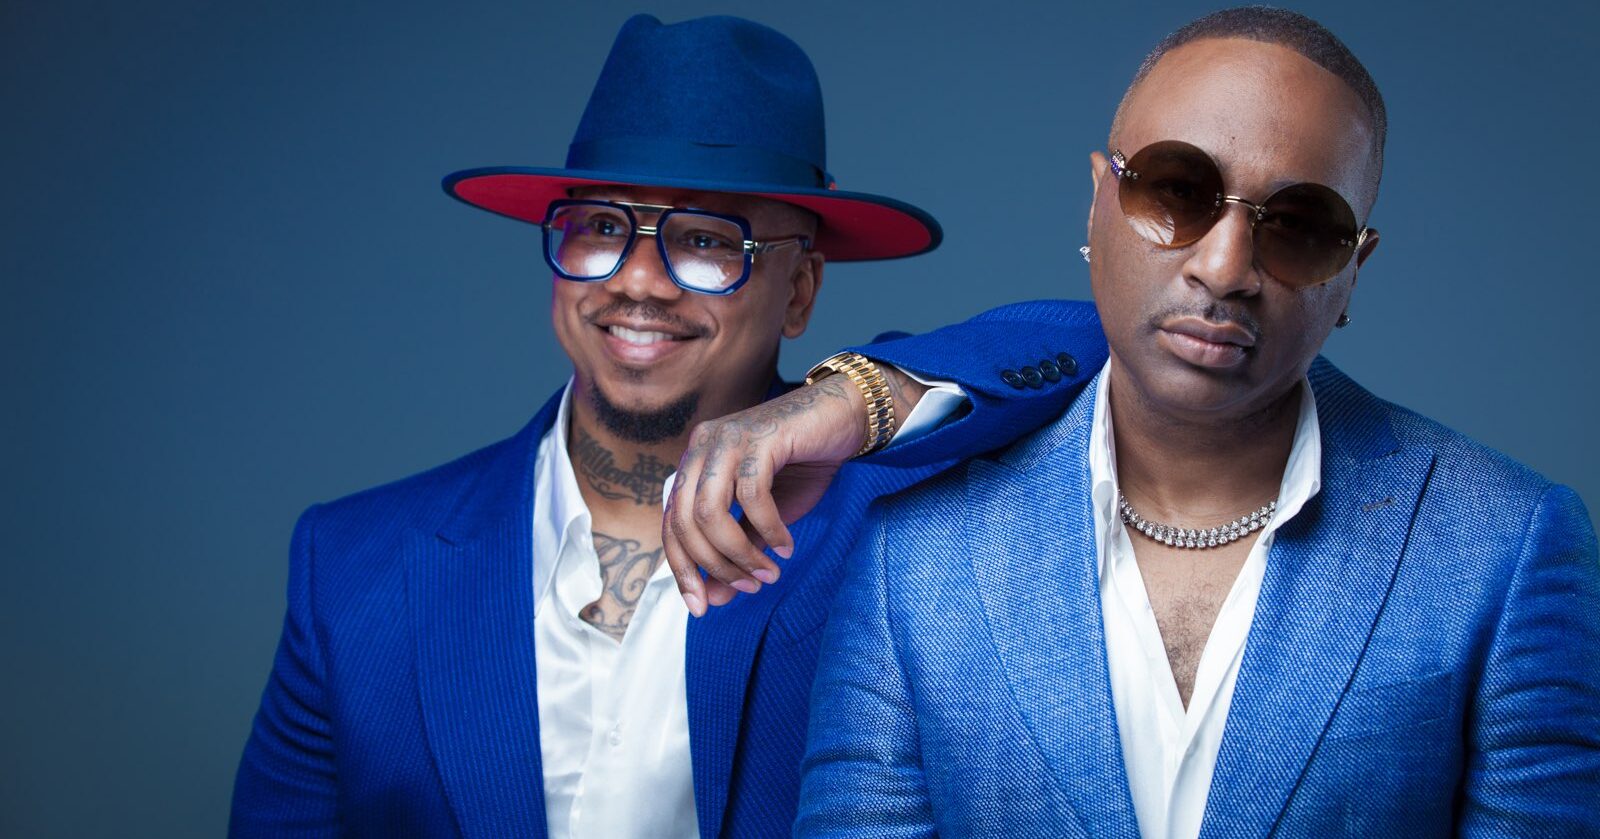 R&B Group 112 to Release New Single “Spend It All”